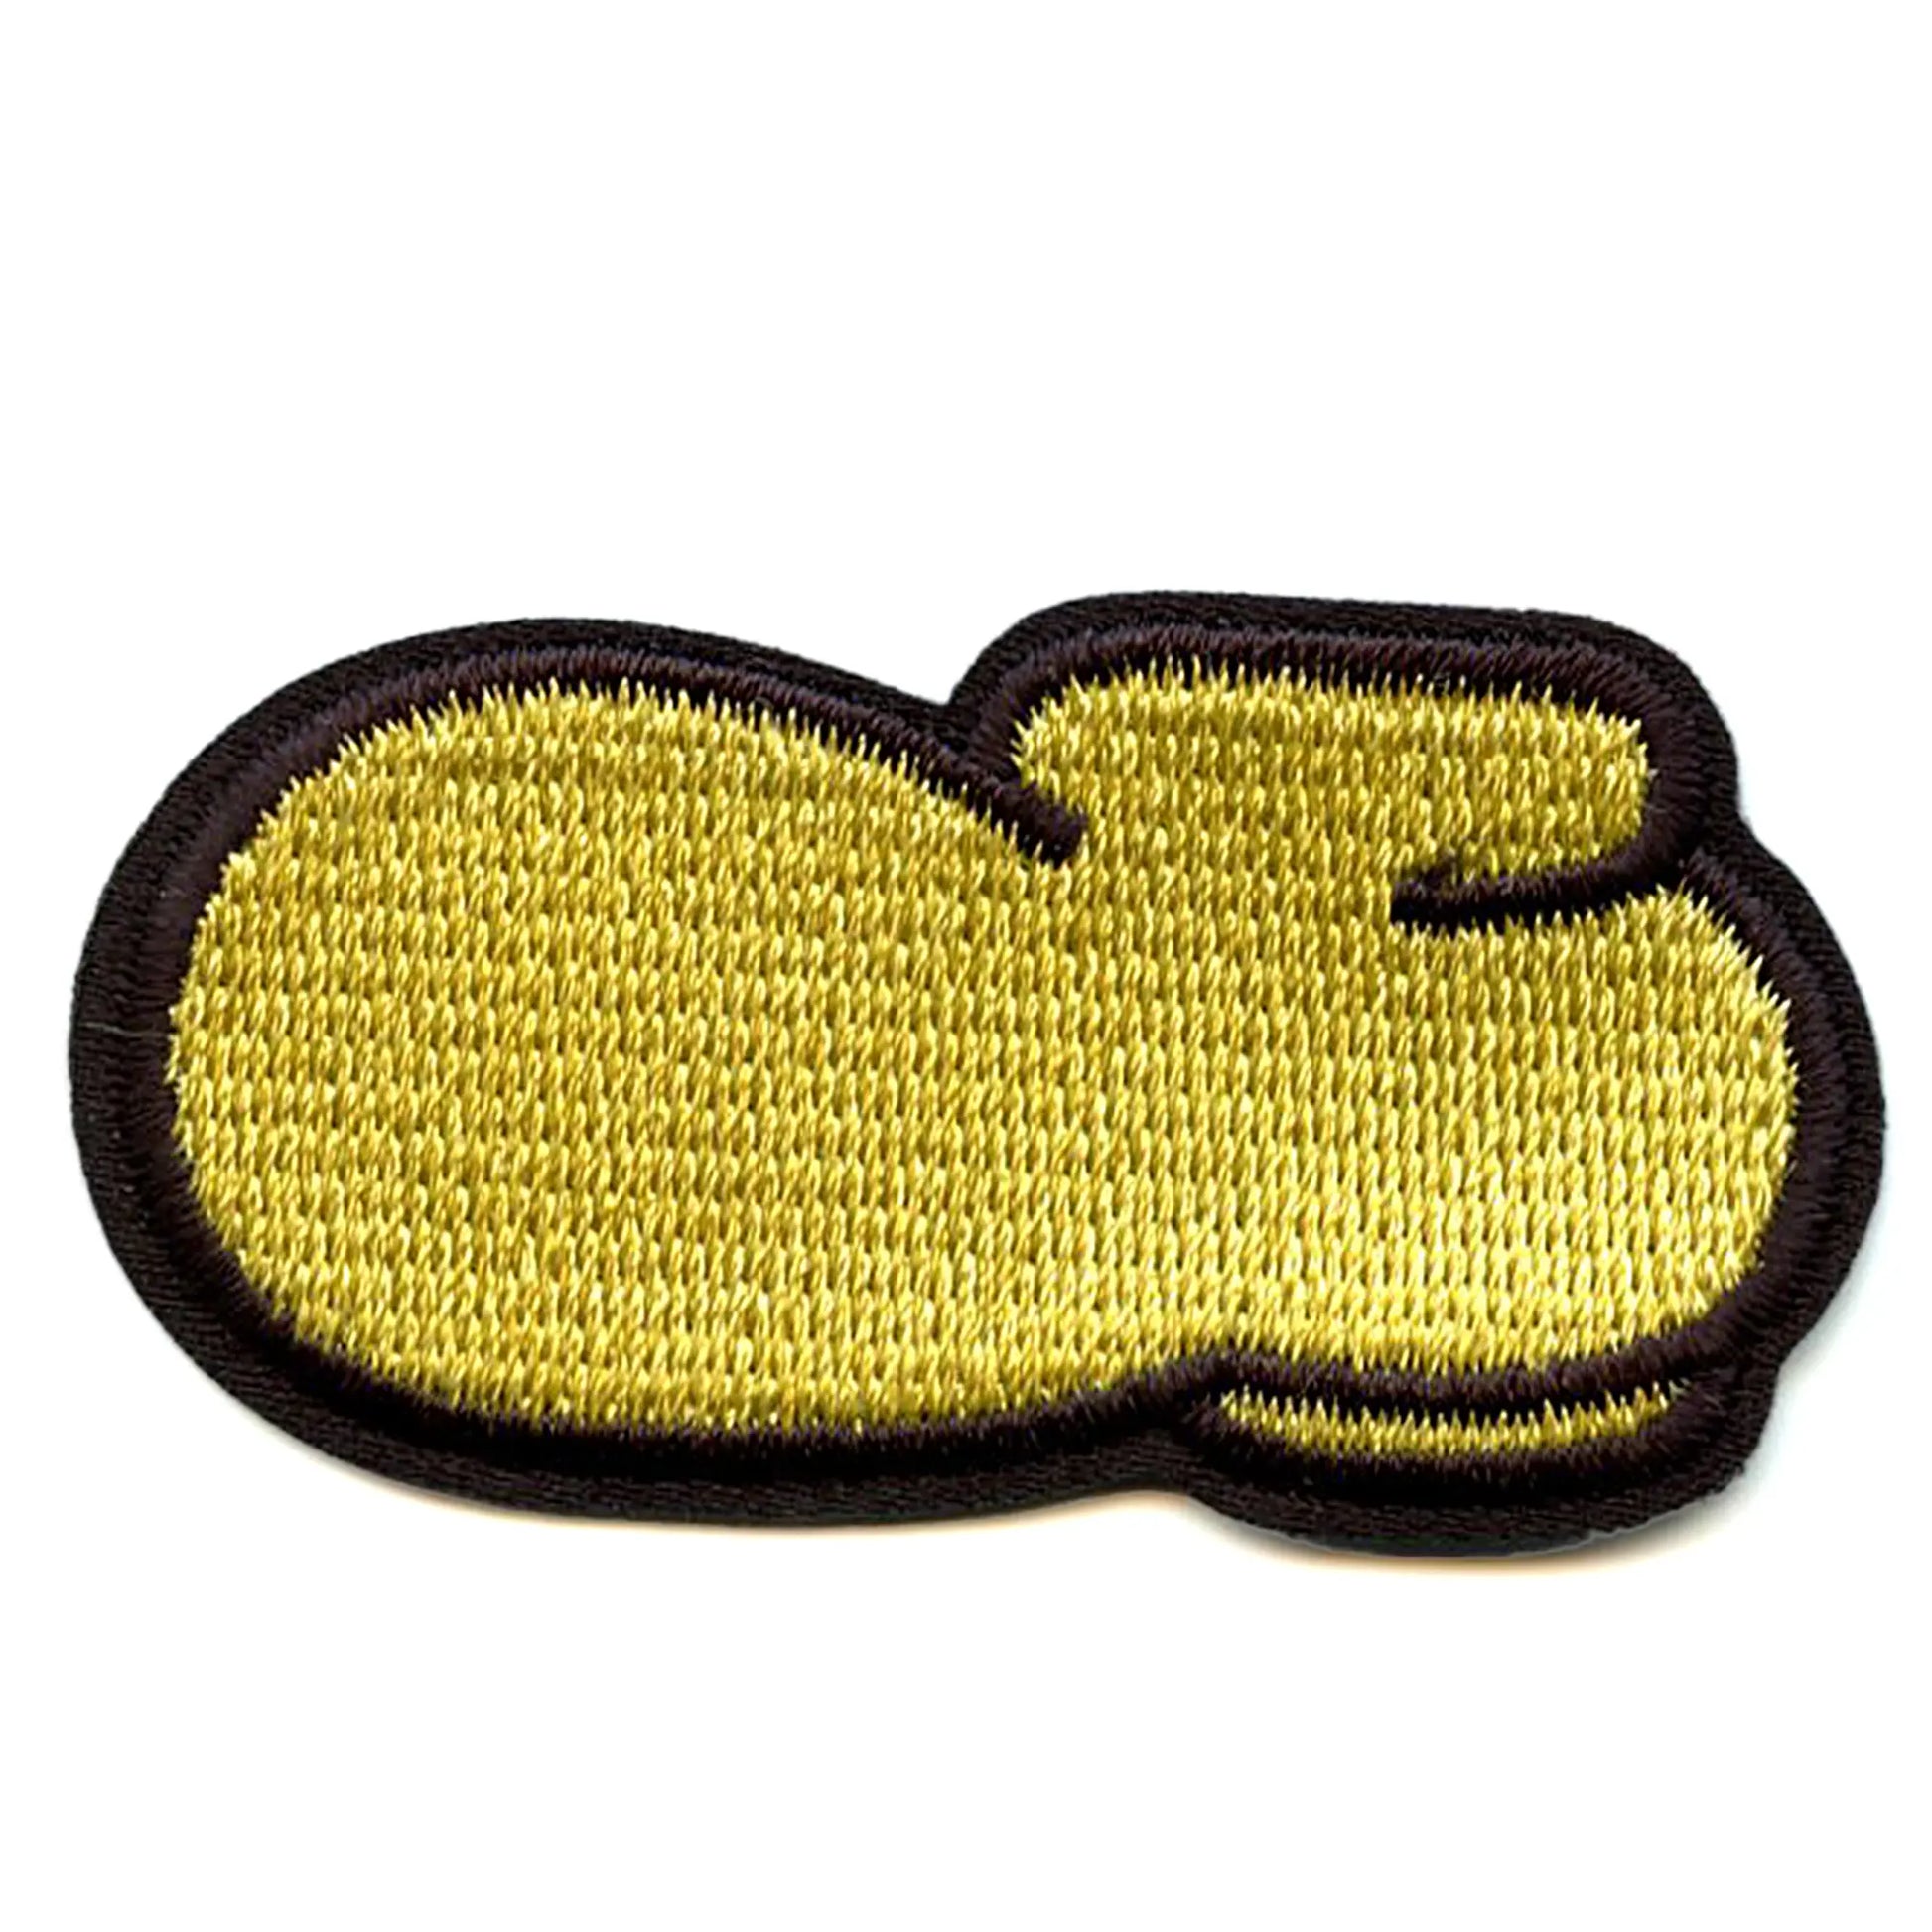 Mickey Mouse Shoe Patch Disney Wardrobe Cartoon Embroidered Iron On